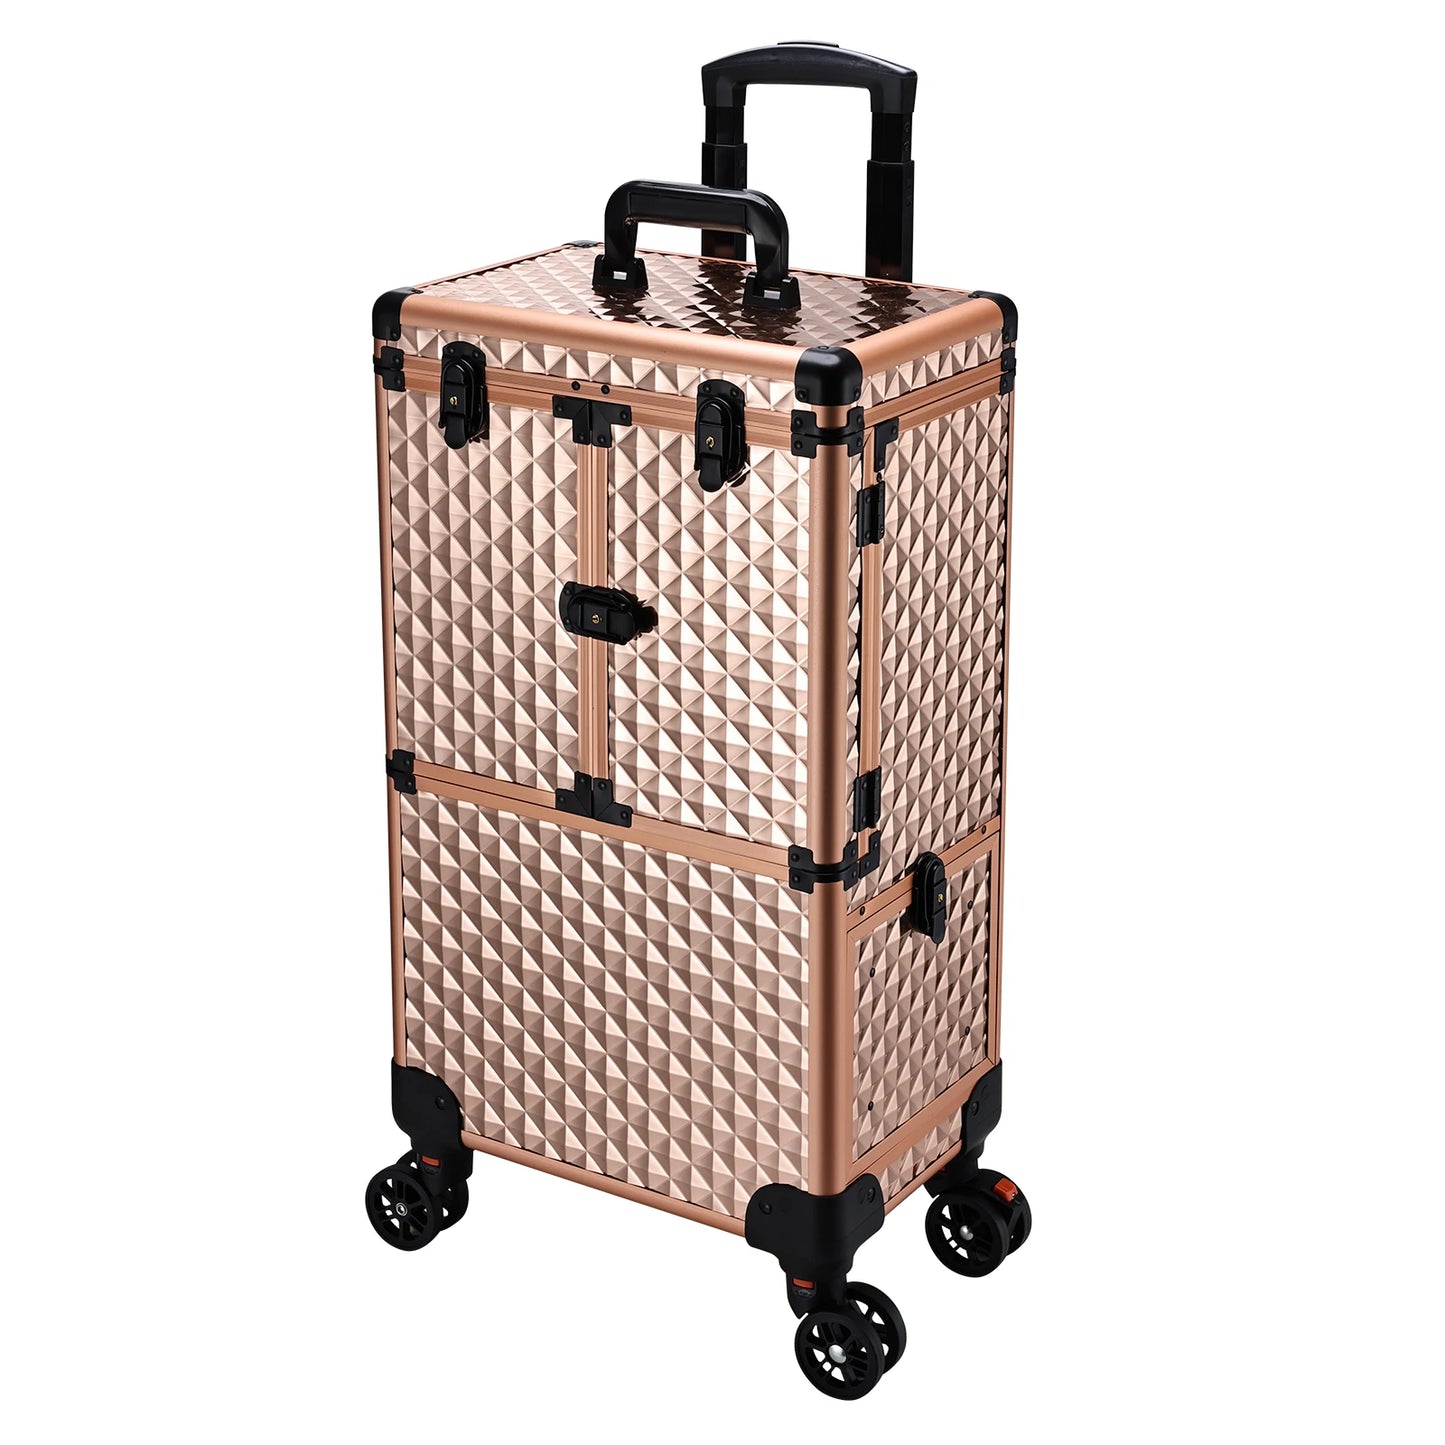 Professional Extendable Tray Makeup Case On Wheels